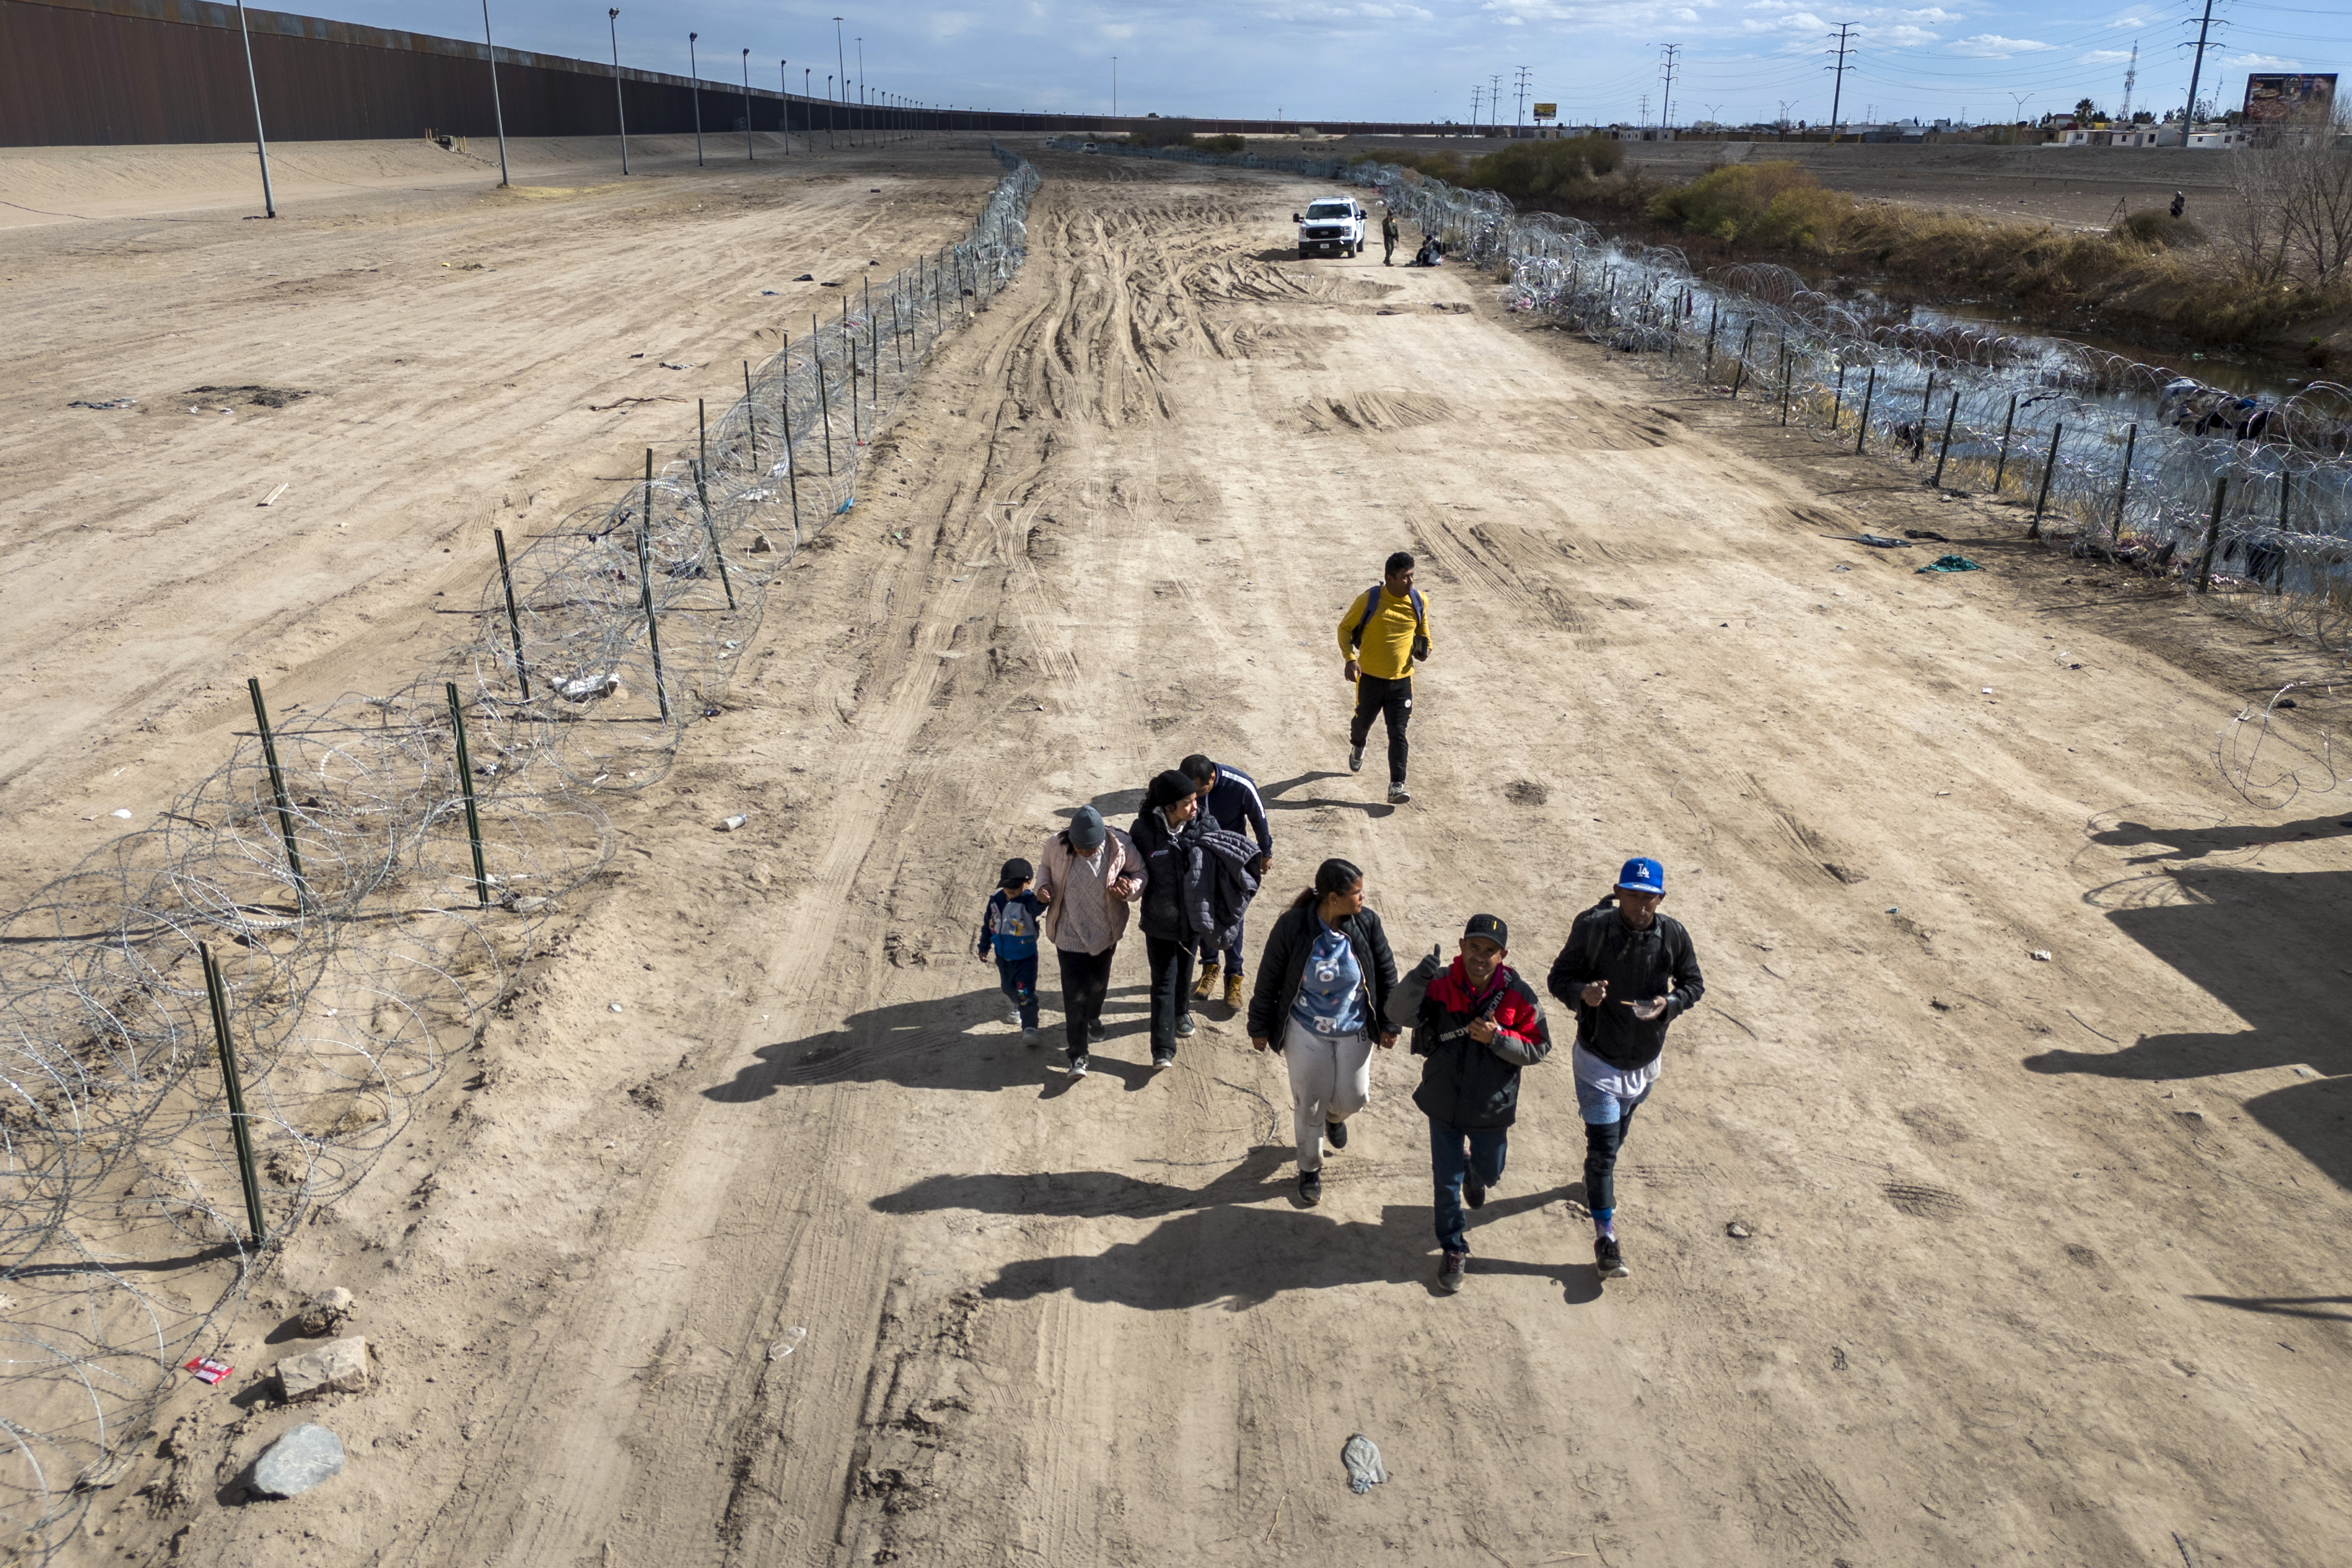 Biden's proposed budget includes $4.7 billion emergency fund for
border migrant surges